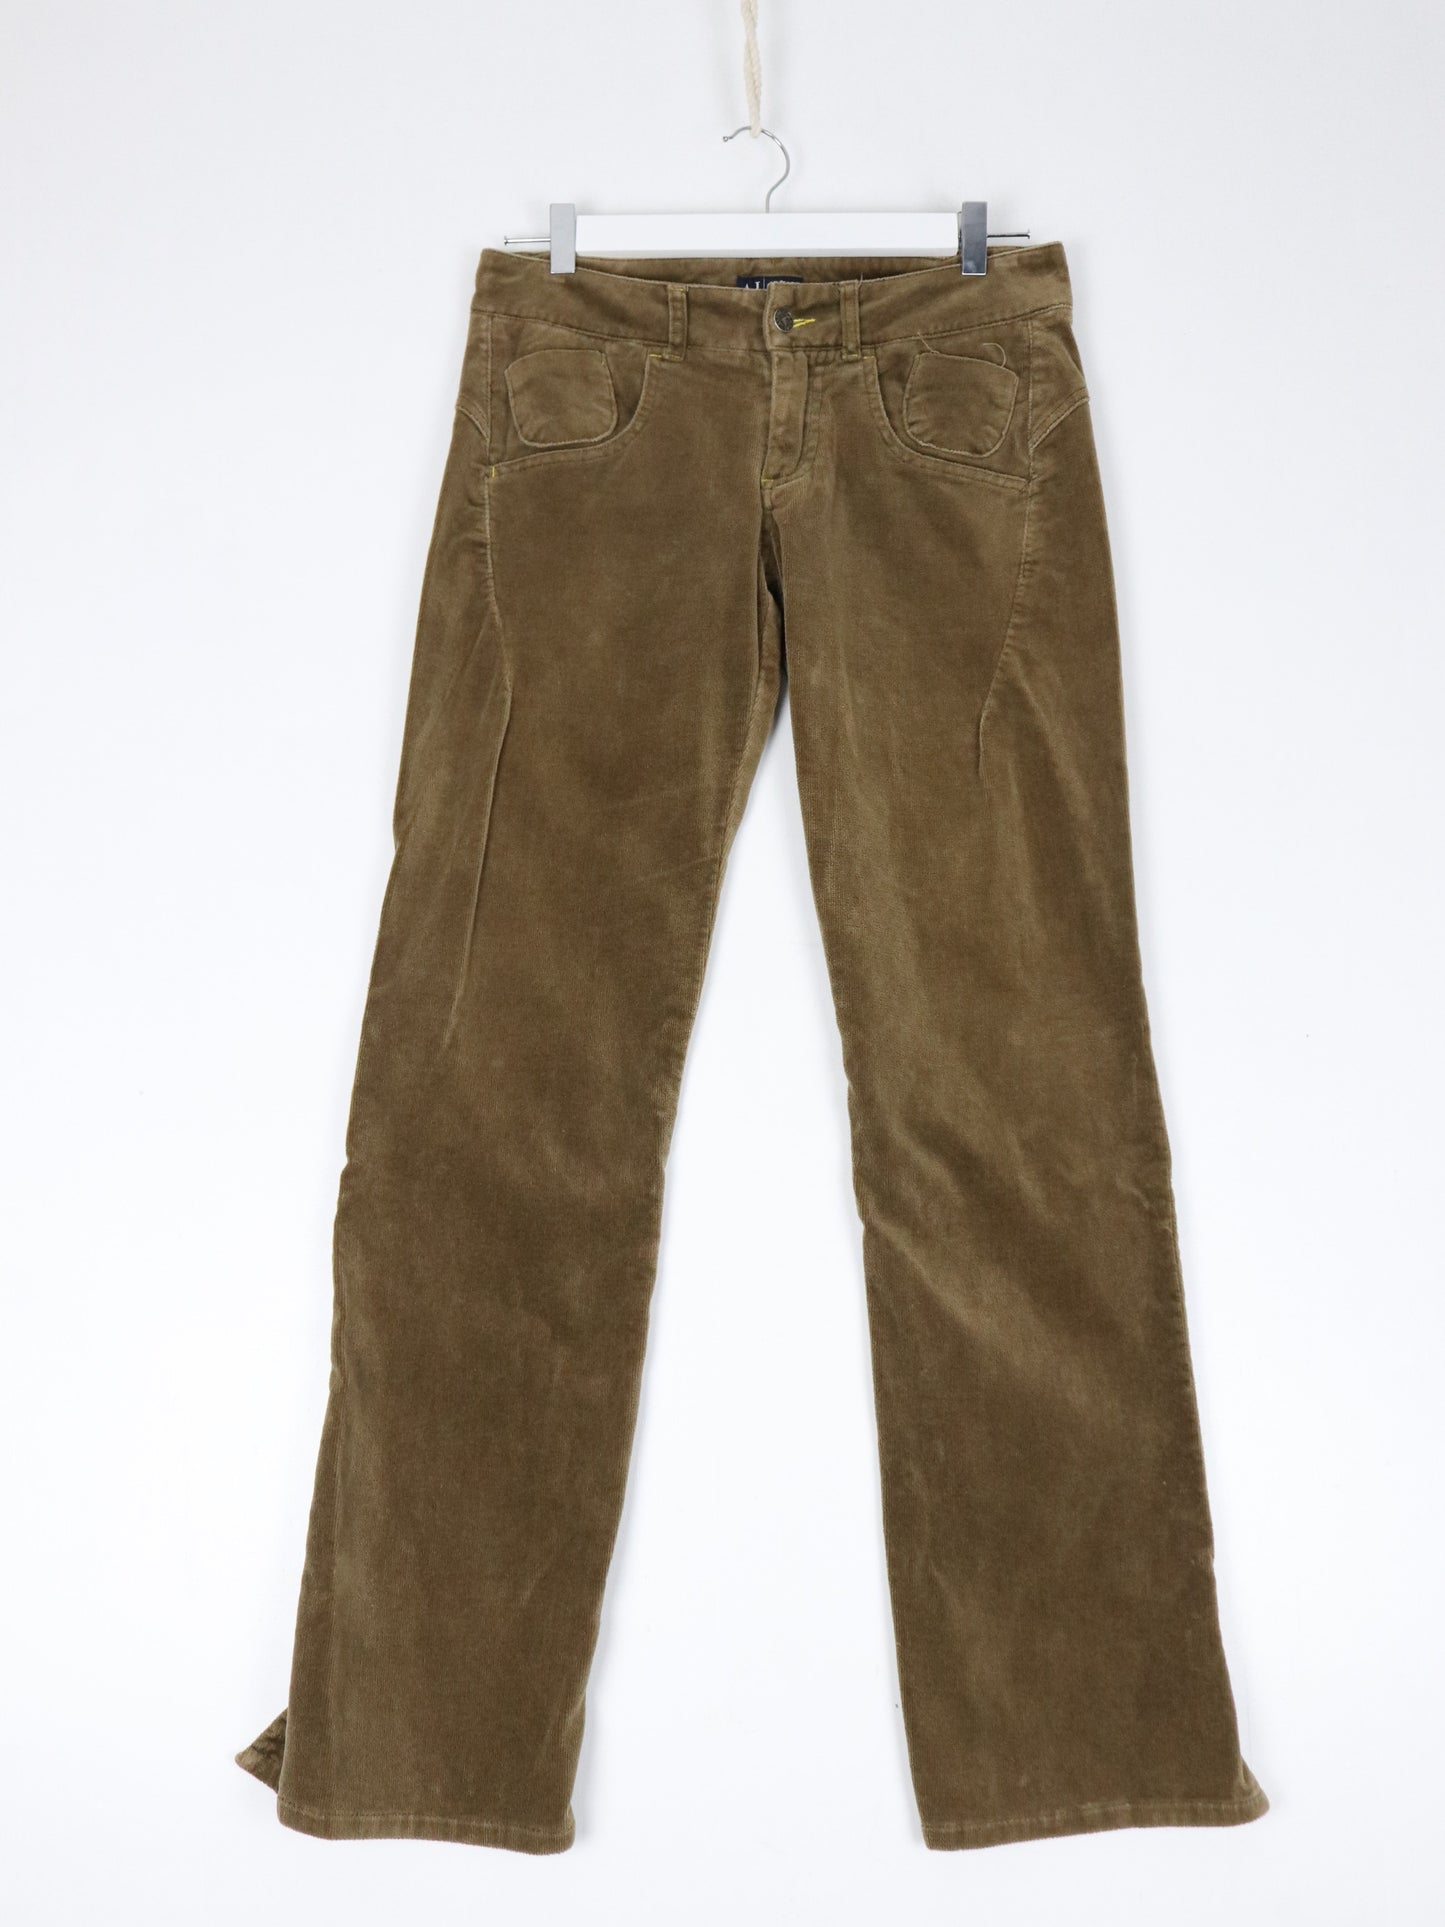 Armani Jeans Pants Fits Womens 30 x 31 Brown Soft Touch